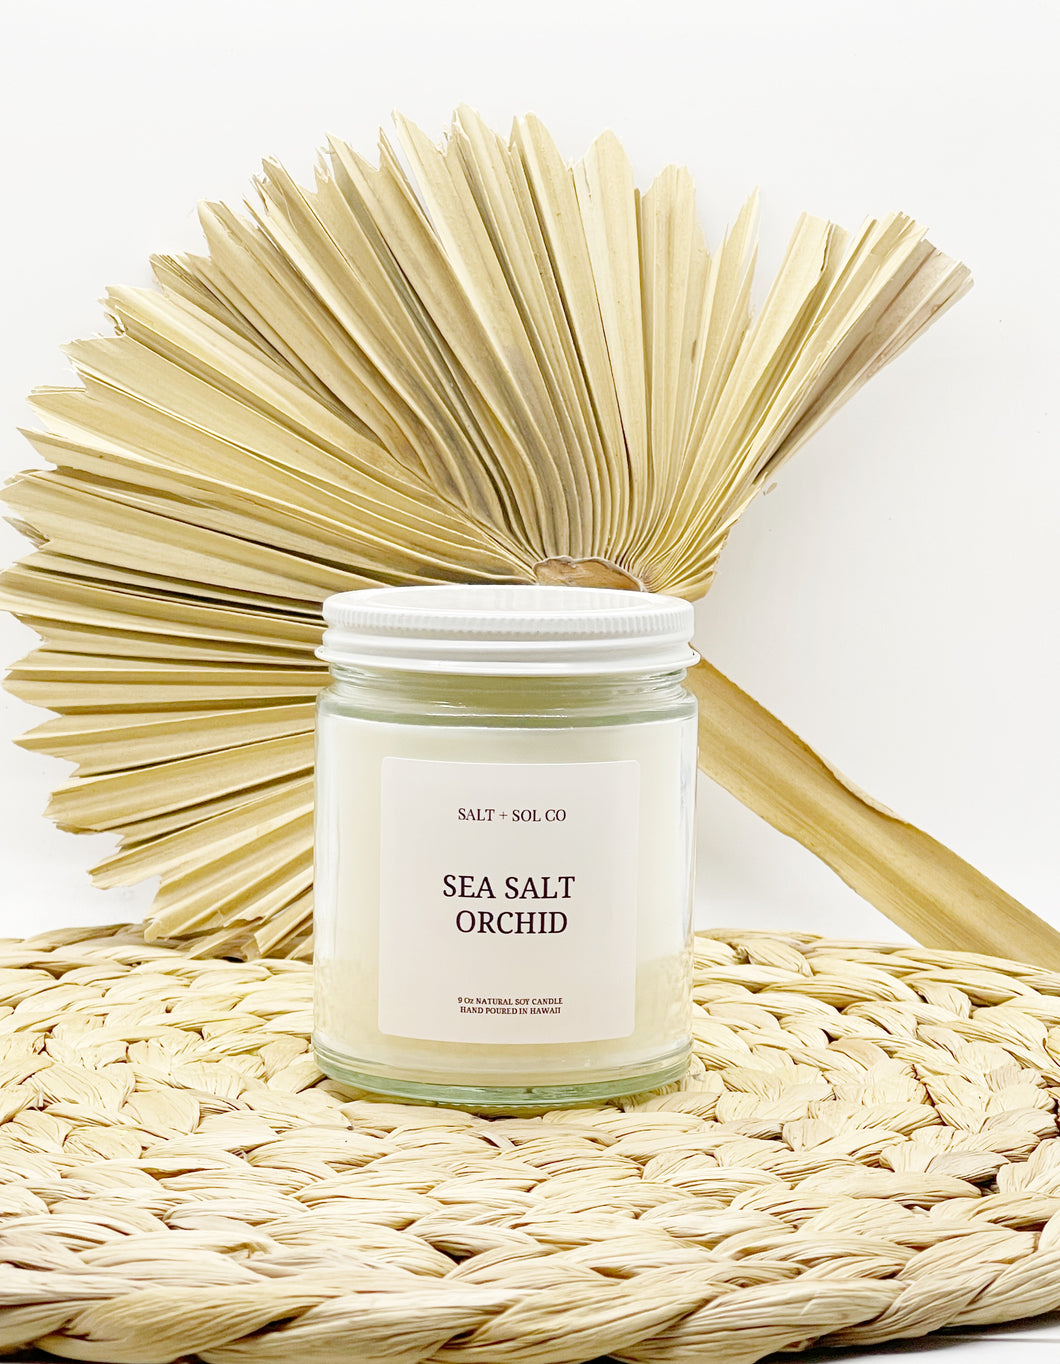 Purchase Sea Salt & Orchis Soy Wax Candle for sale at Salt Sol Co.